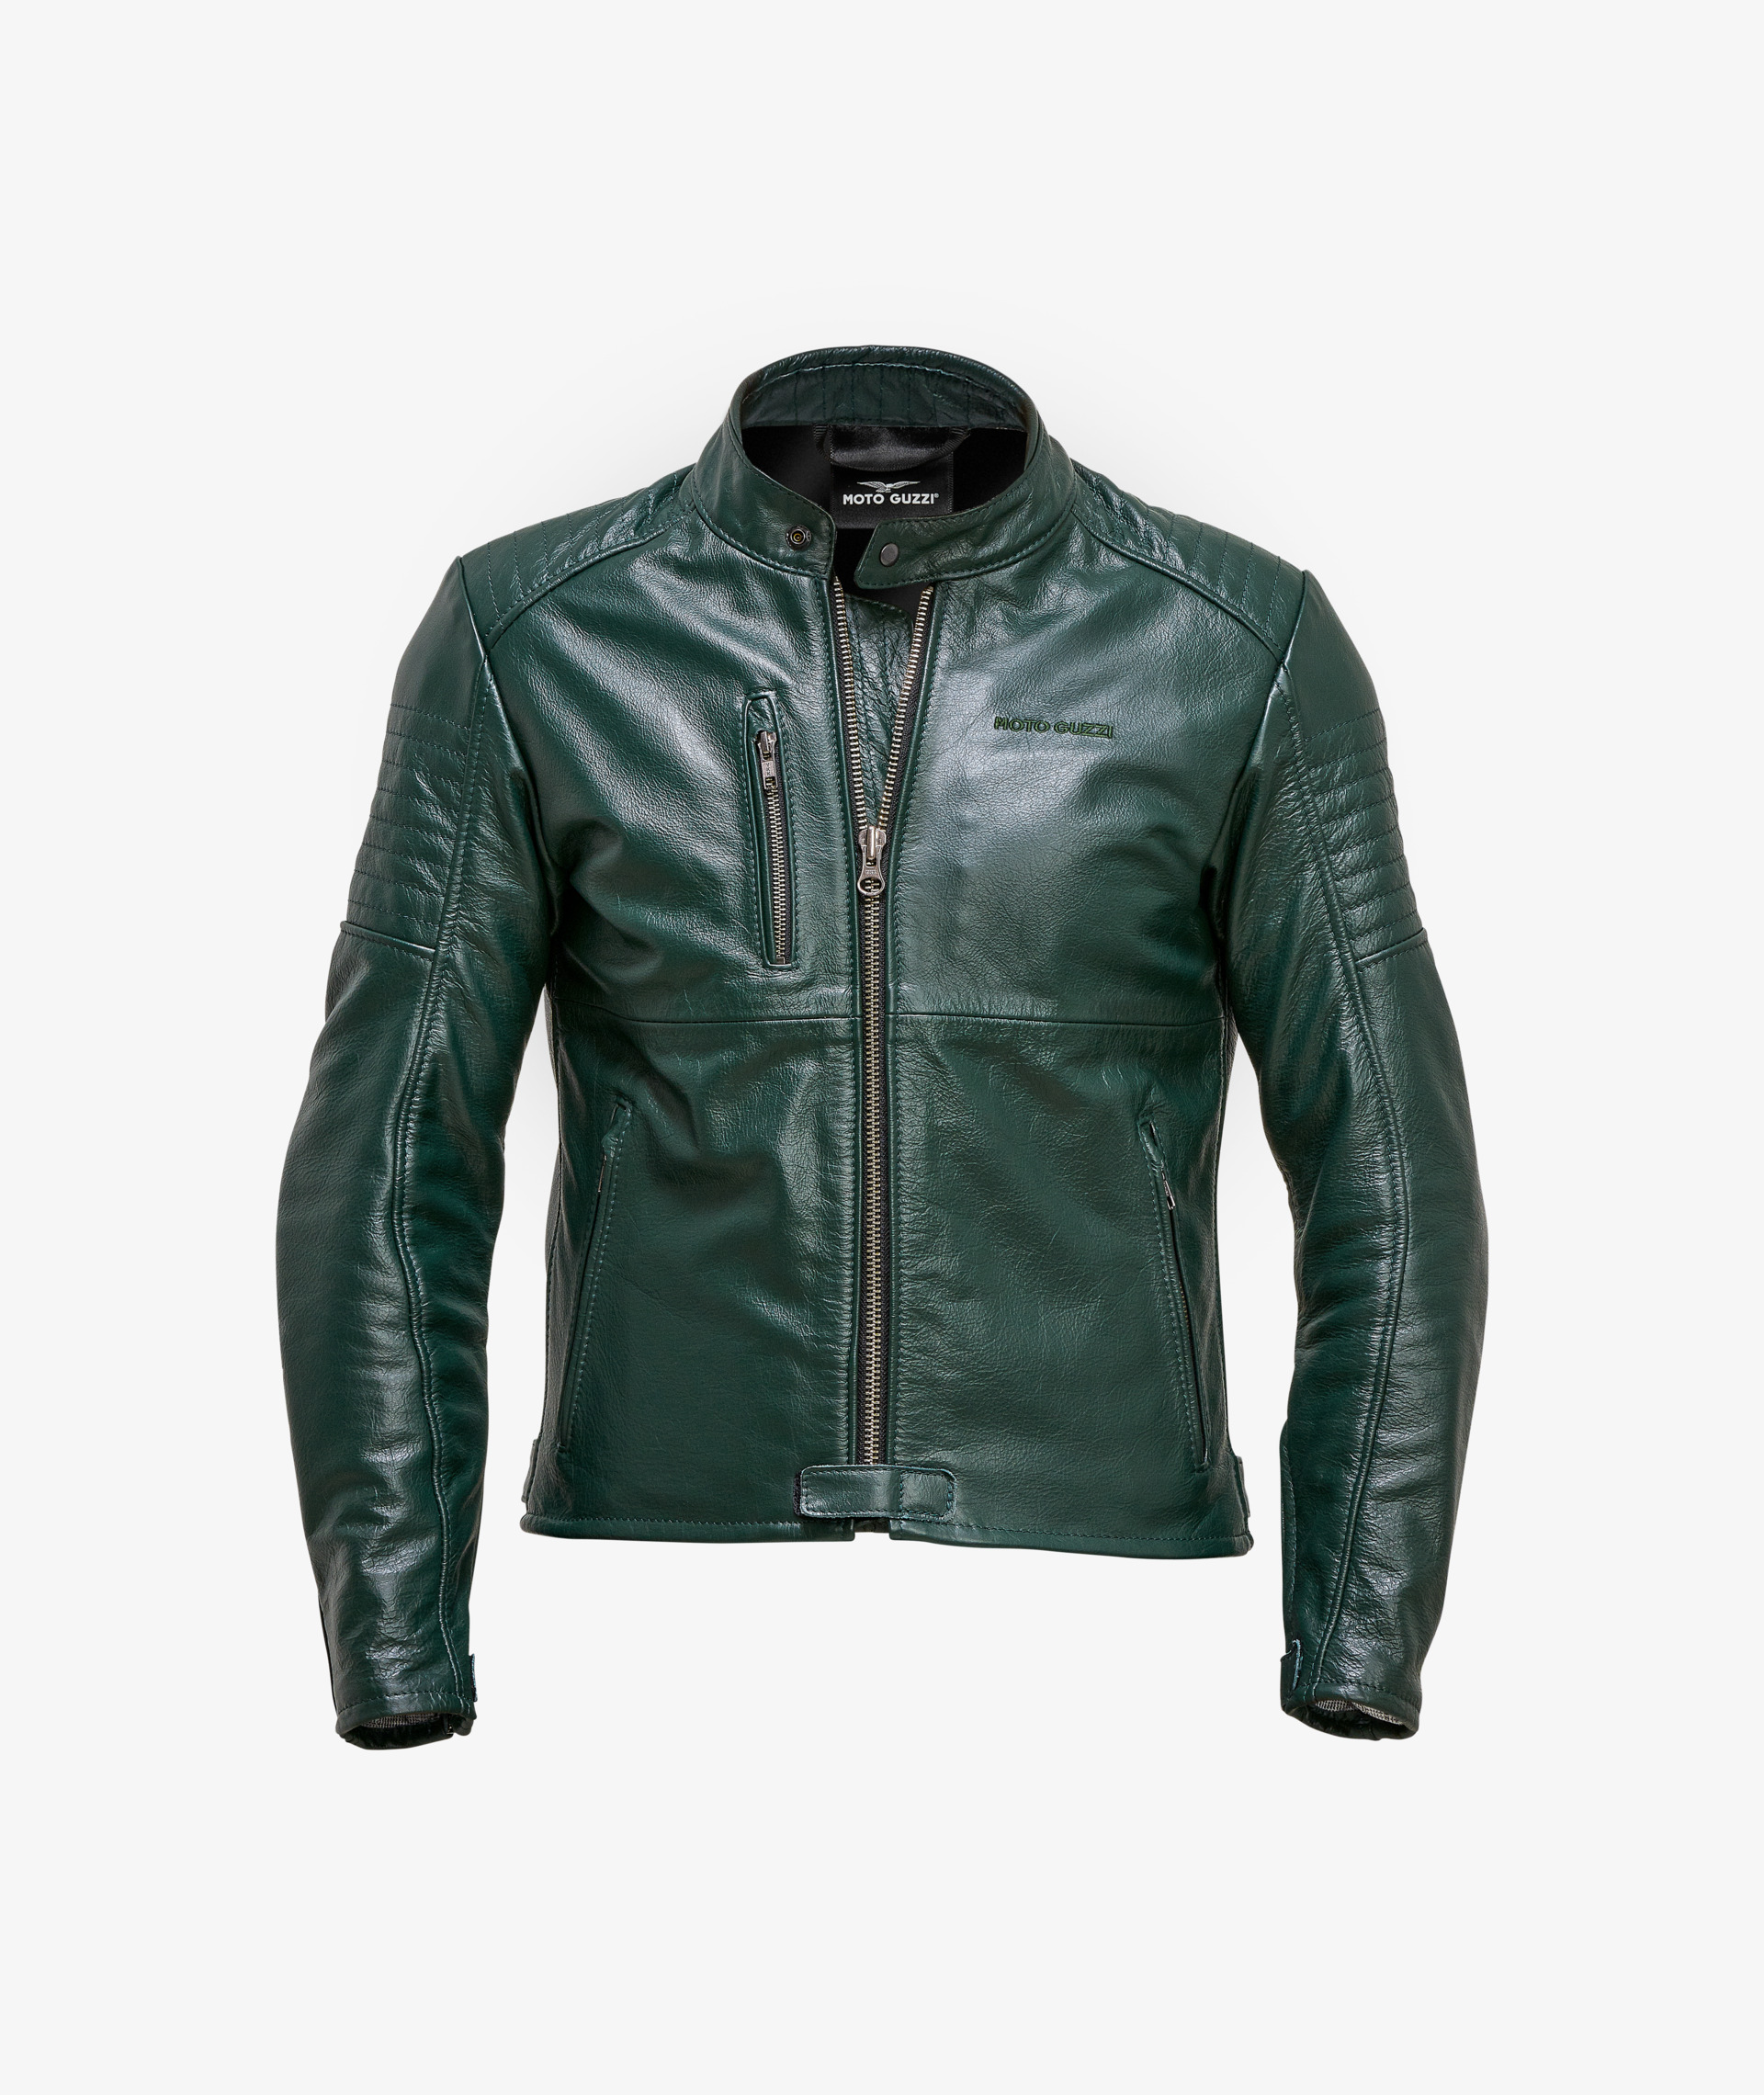 Men's Green Leather Jacket with Added Protections | Jackets